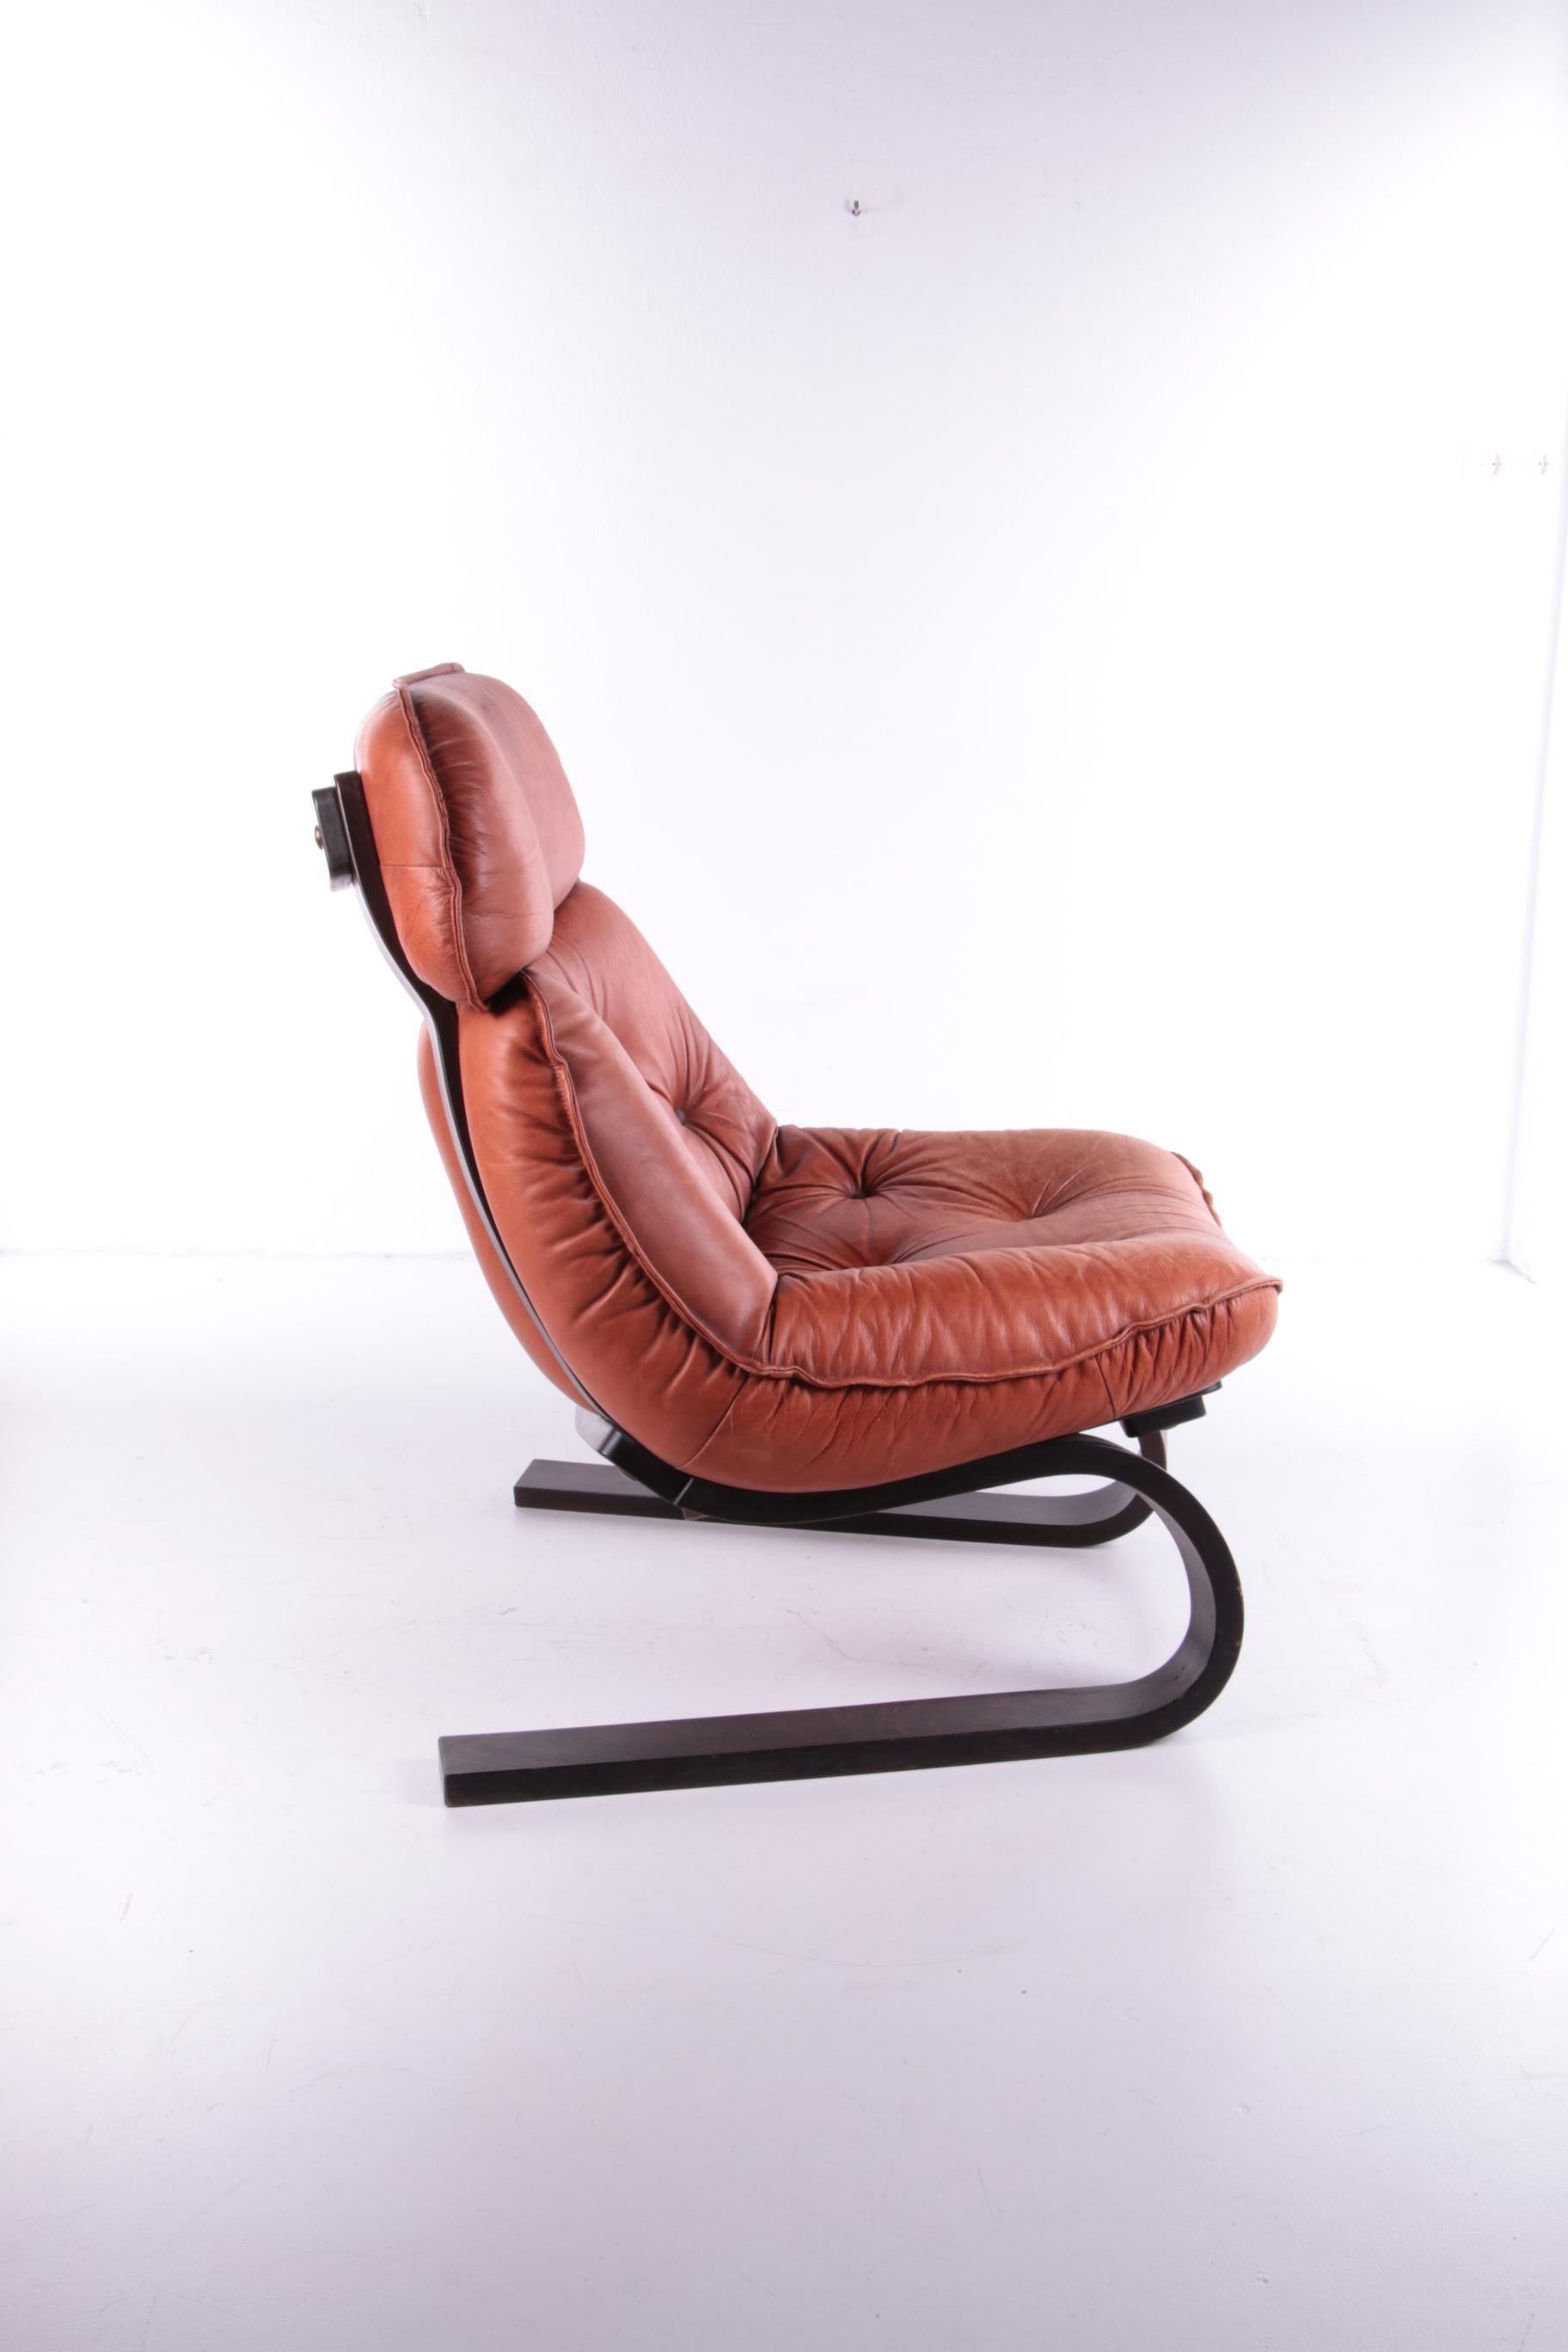 Mid-Century Modern Vintage Brazilian Armchair with Cognac Color Leather Seat Cushion, 70s For Sale